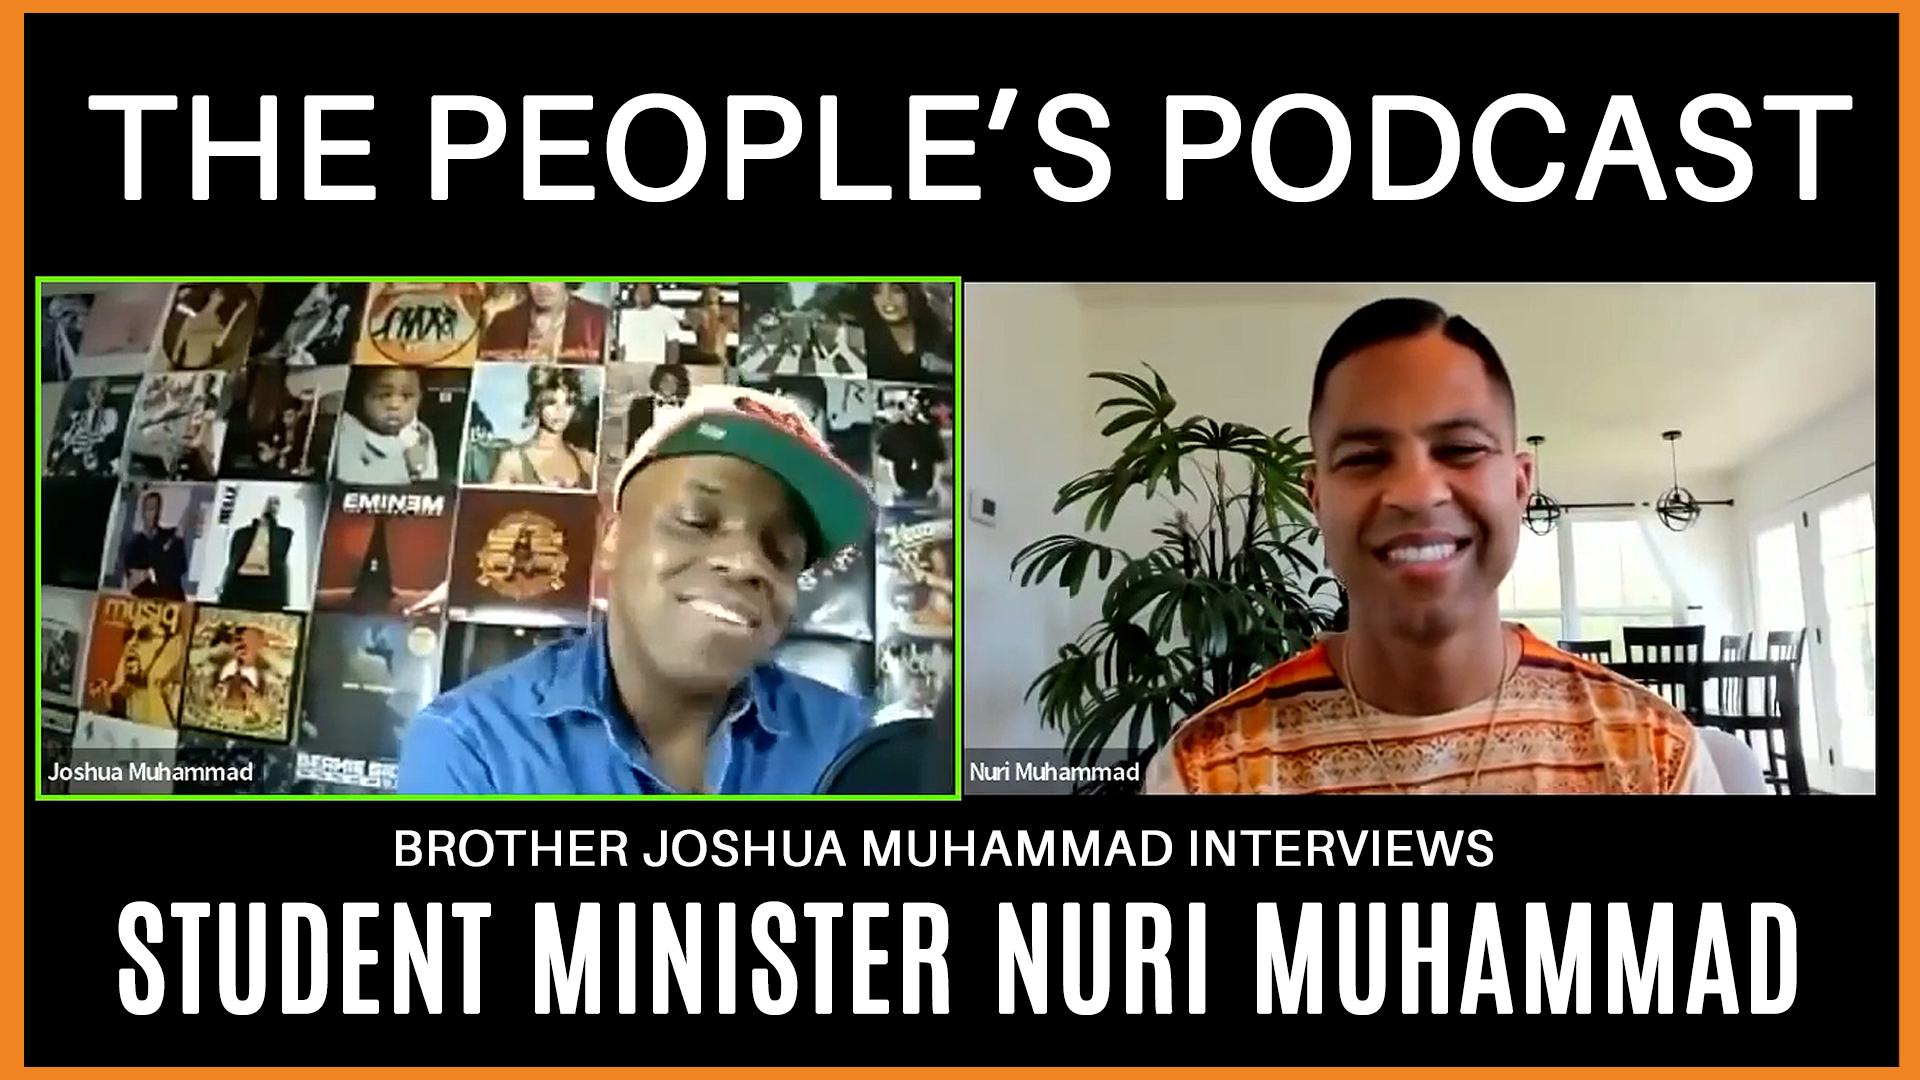 The Peoples Podcast: Interview with Student Minister Nuri Muhammad